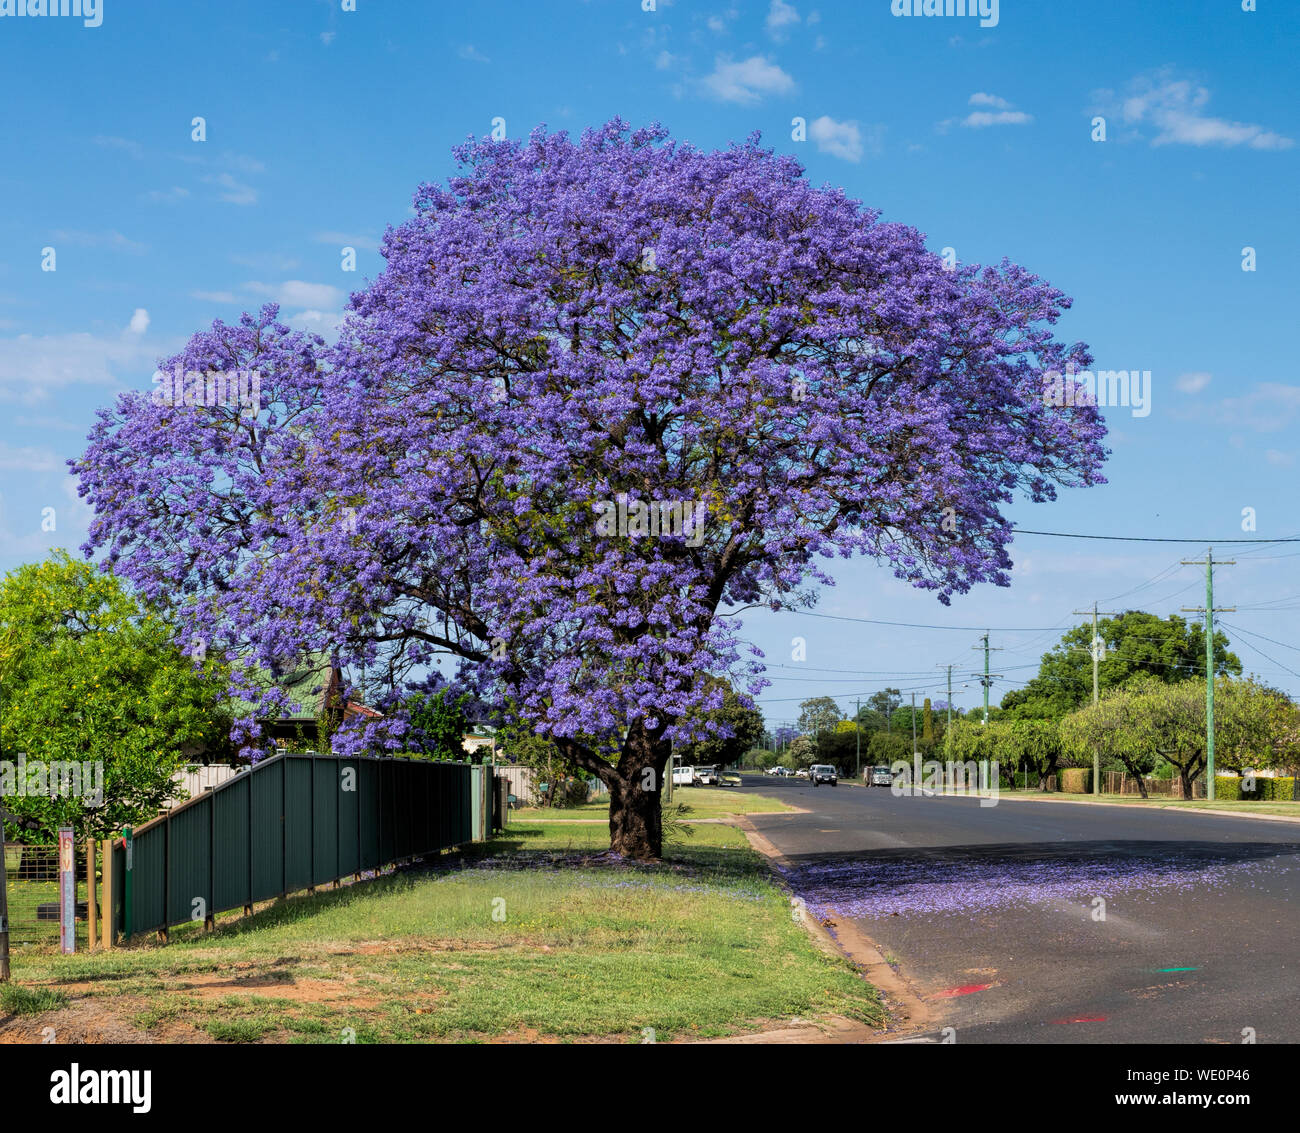 A Jacaranda Tree in full bloom as street tree in a small Queensland town in Australia against a blue sky Stock Photo